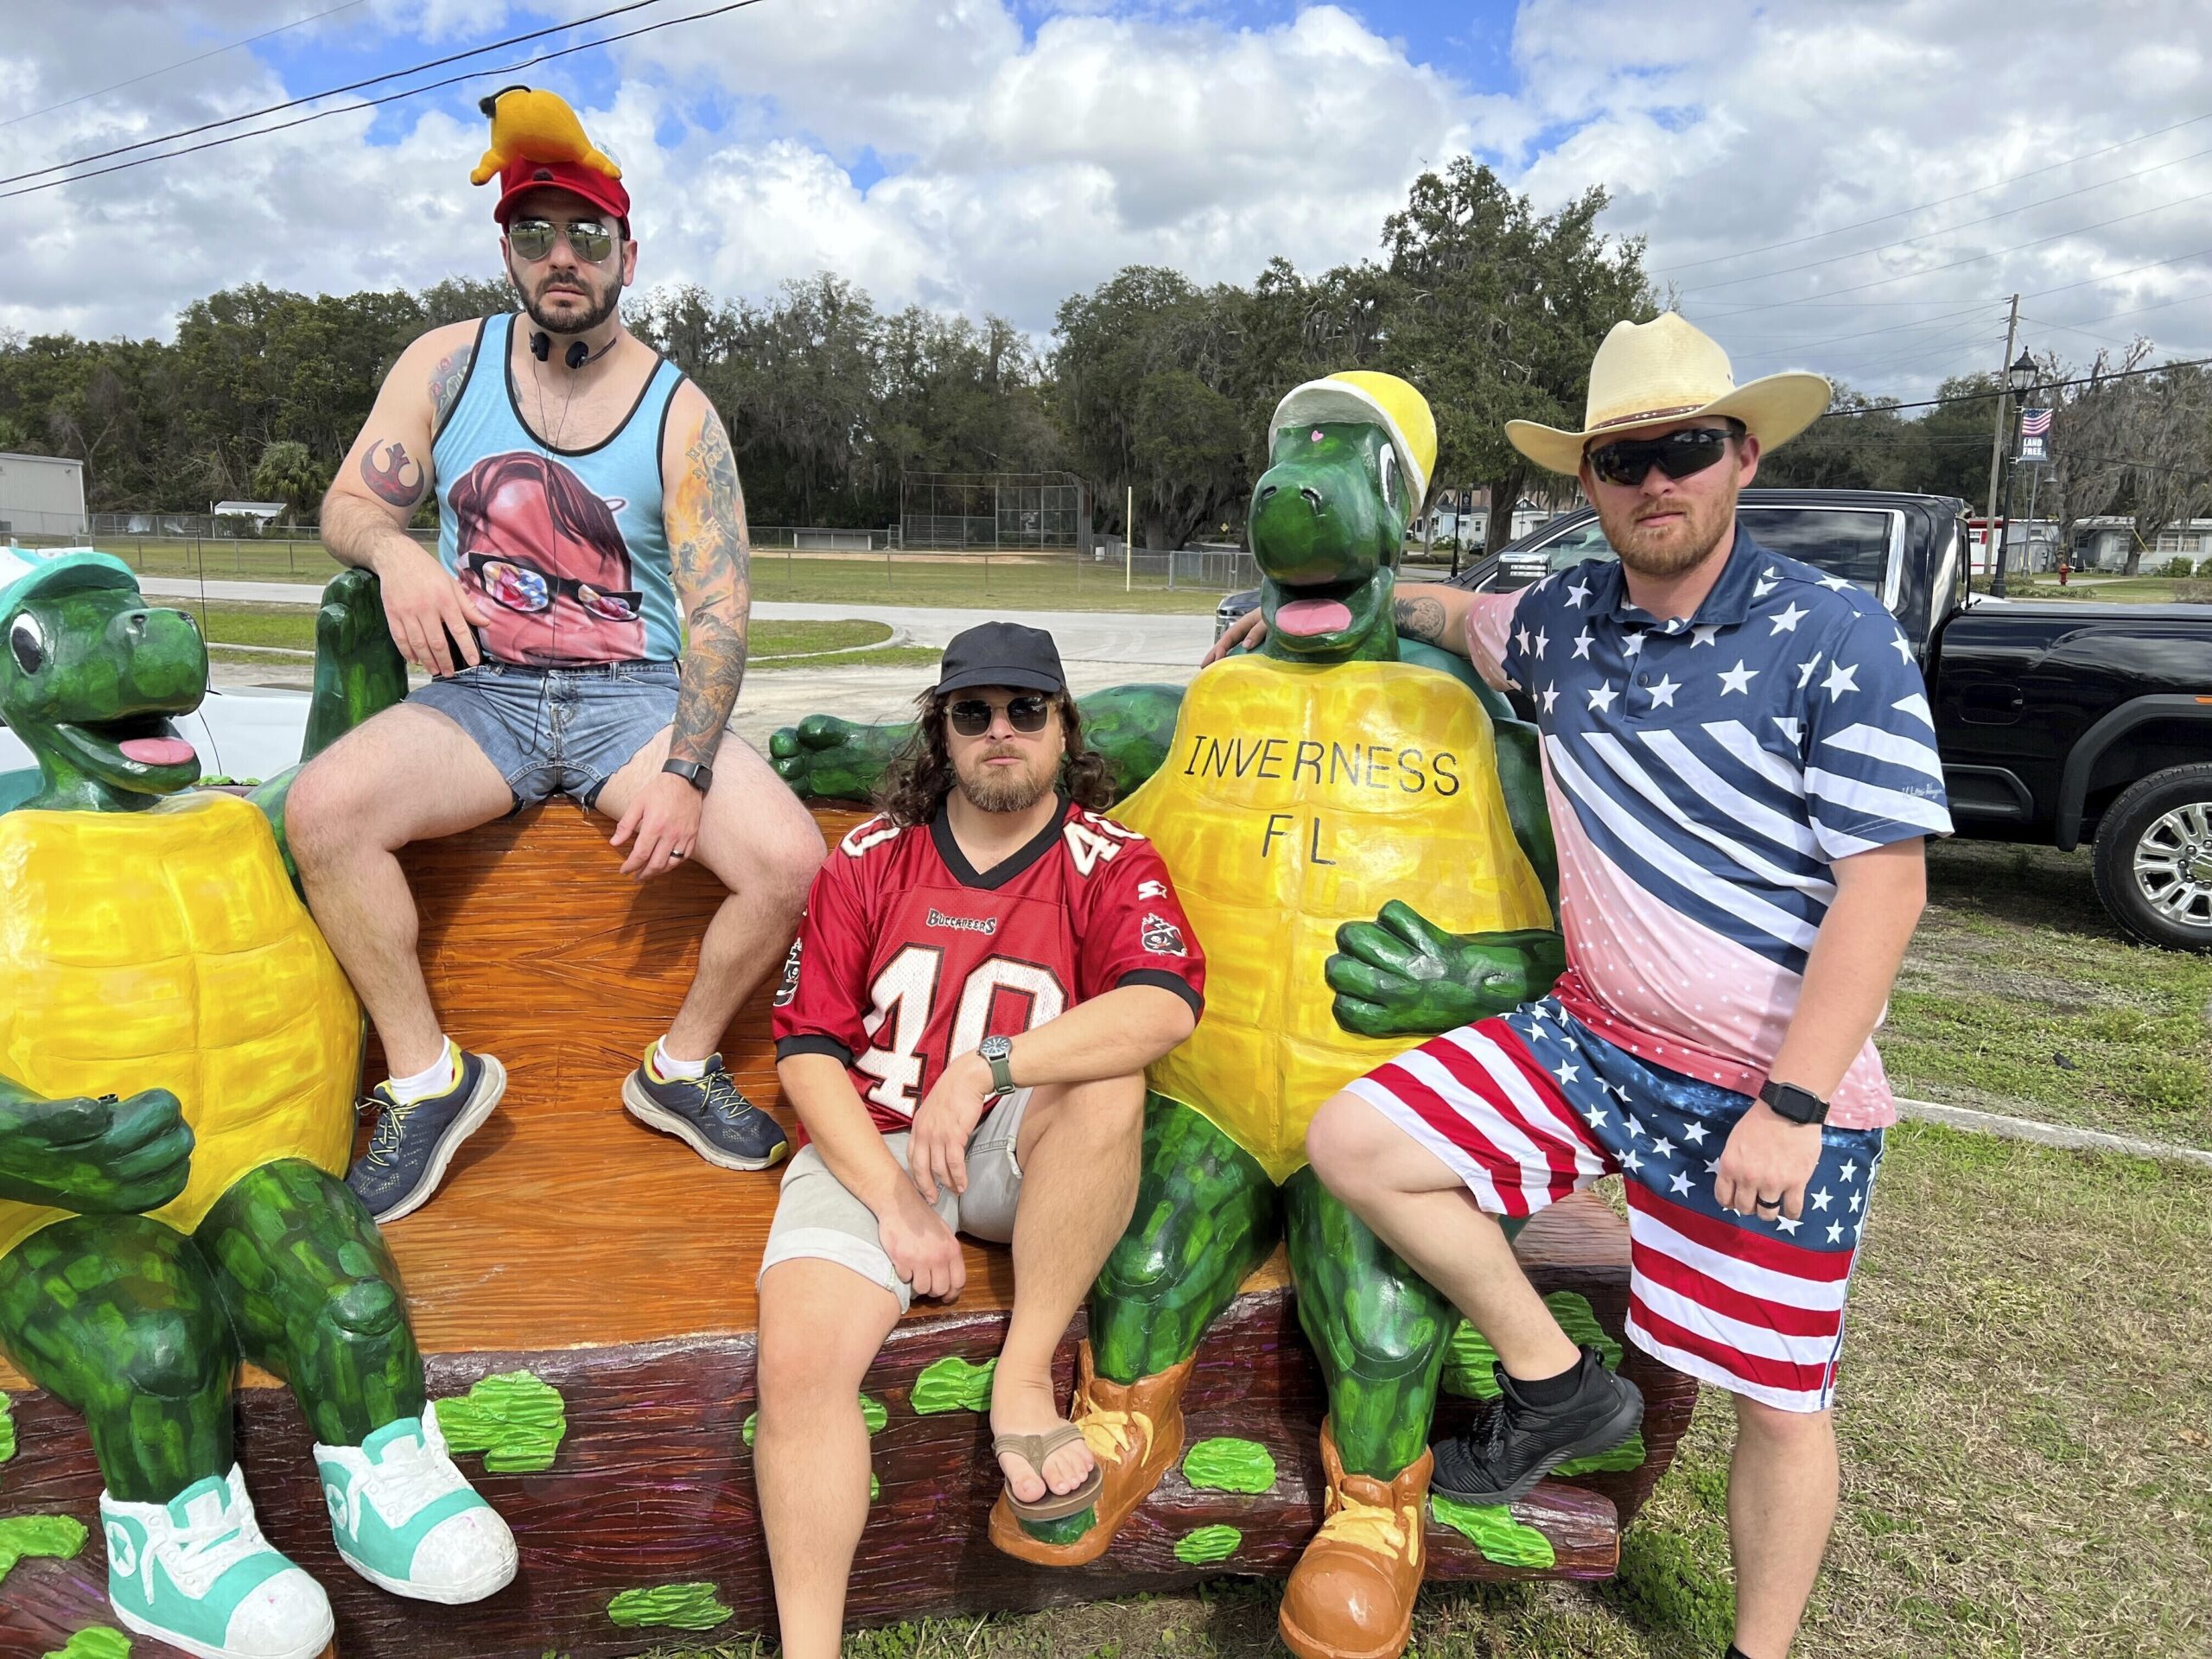 This image provided by Tyler Watts shows Florida Man Games competitors, from left, Joshua Barr, Mic...